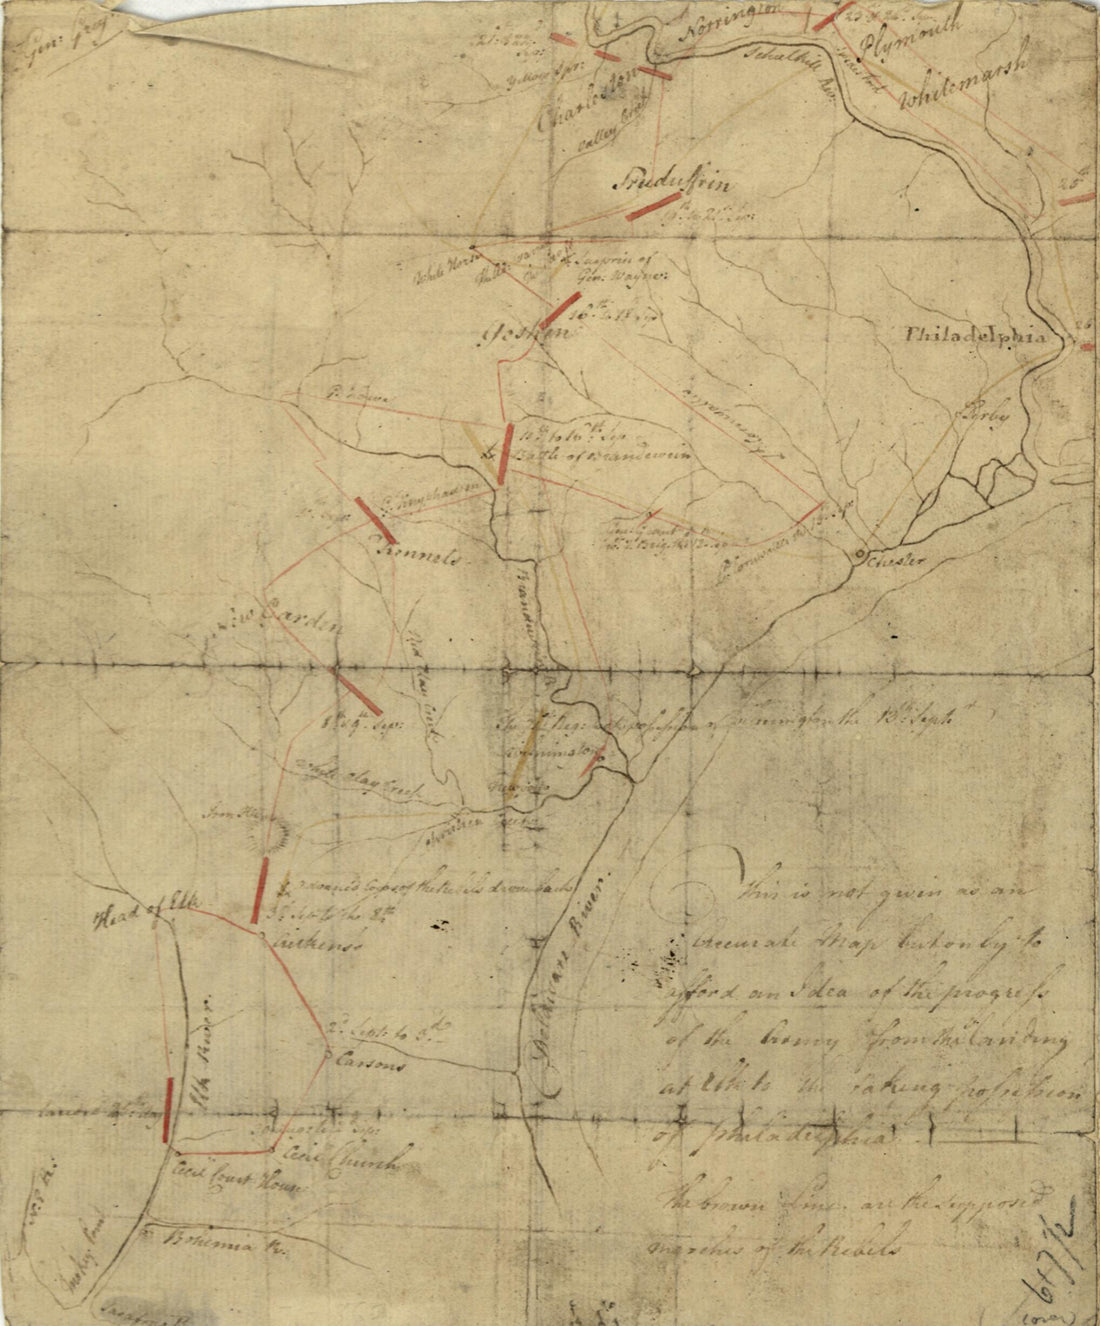 This old map of This Is Not Given As an Accurate Map, but Only to Afford an Idea of the Progress of the Army from the Landing at Elk to the Taking of Possession of Philadelphia. the Brown Lines Are the Supposed Marches of the Rebels from 1777 was created